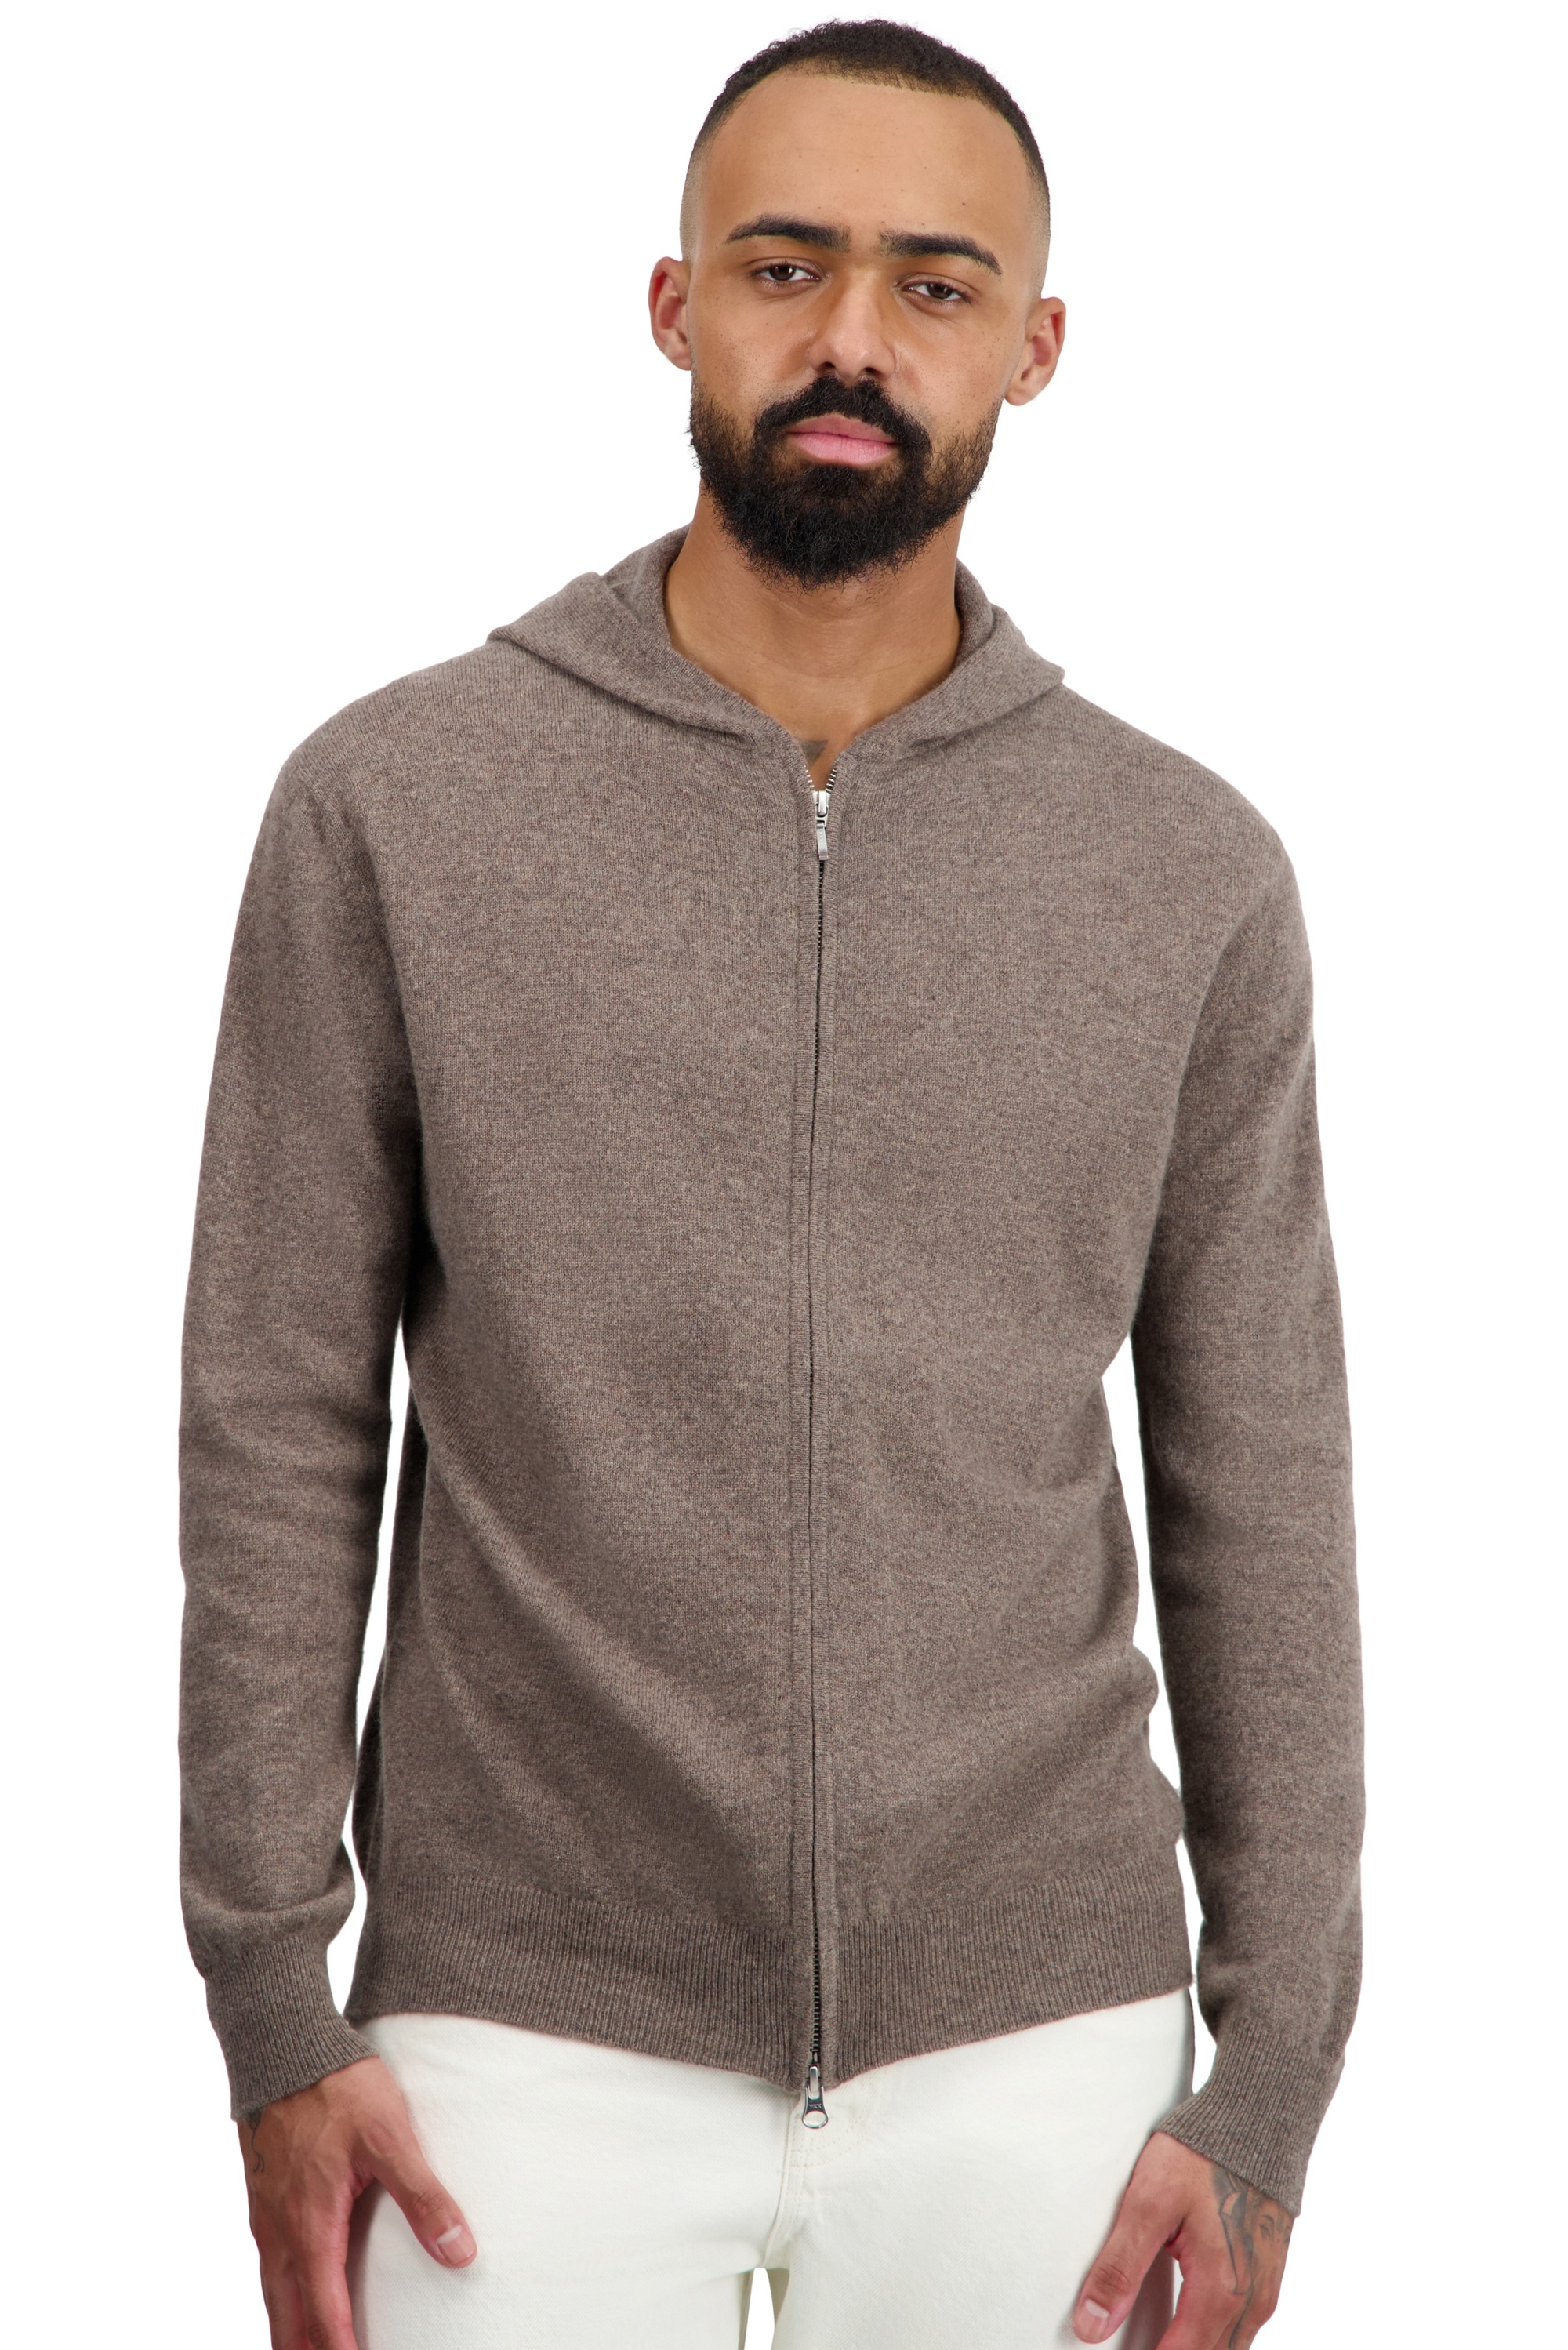 Cashmere men basic sweaters at low prices taboo first otter m